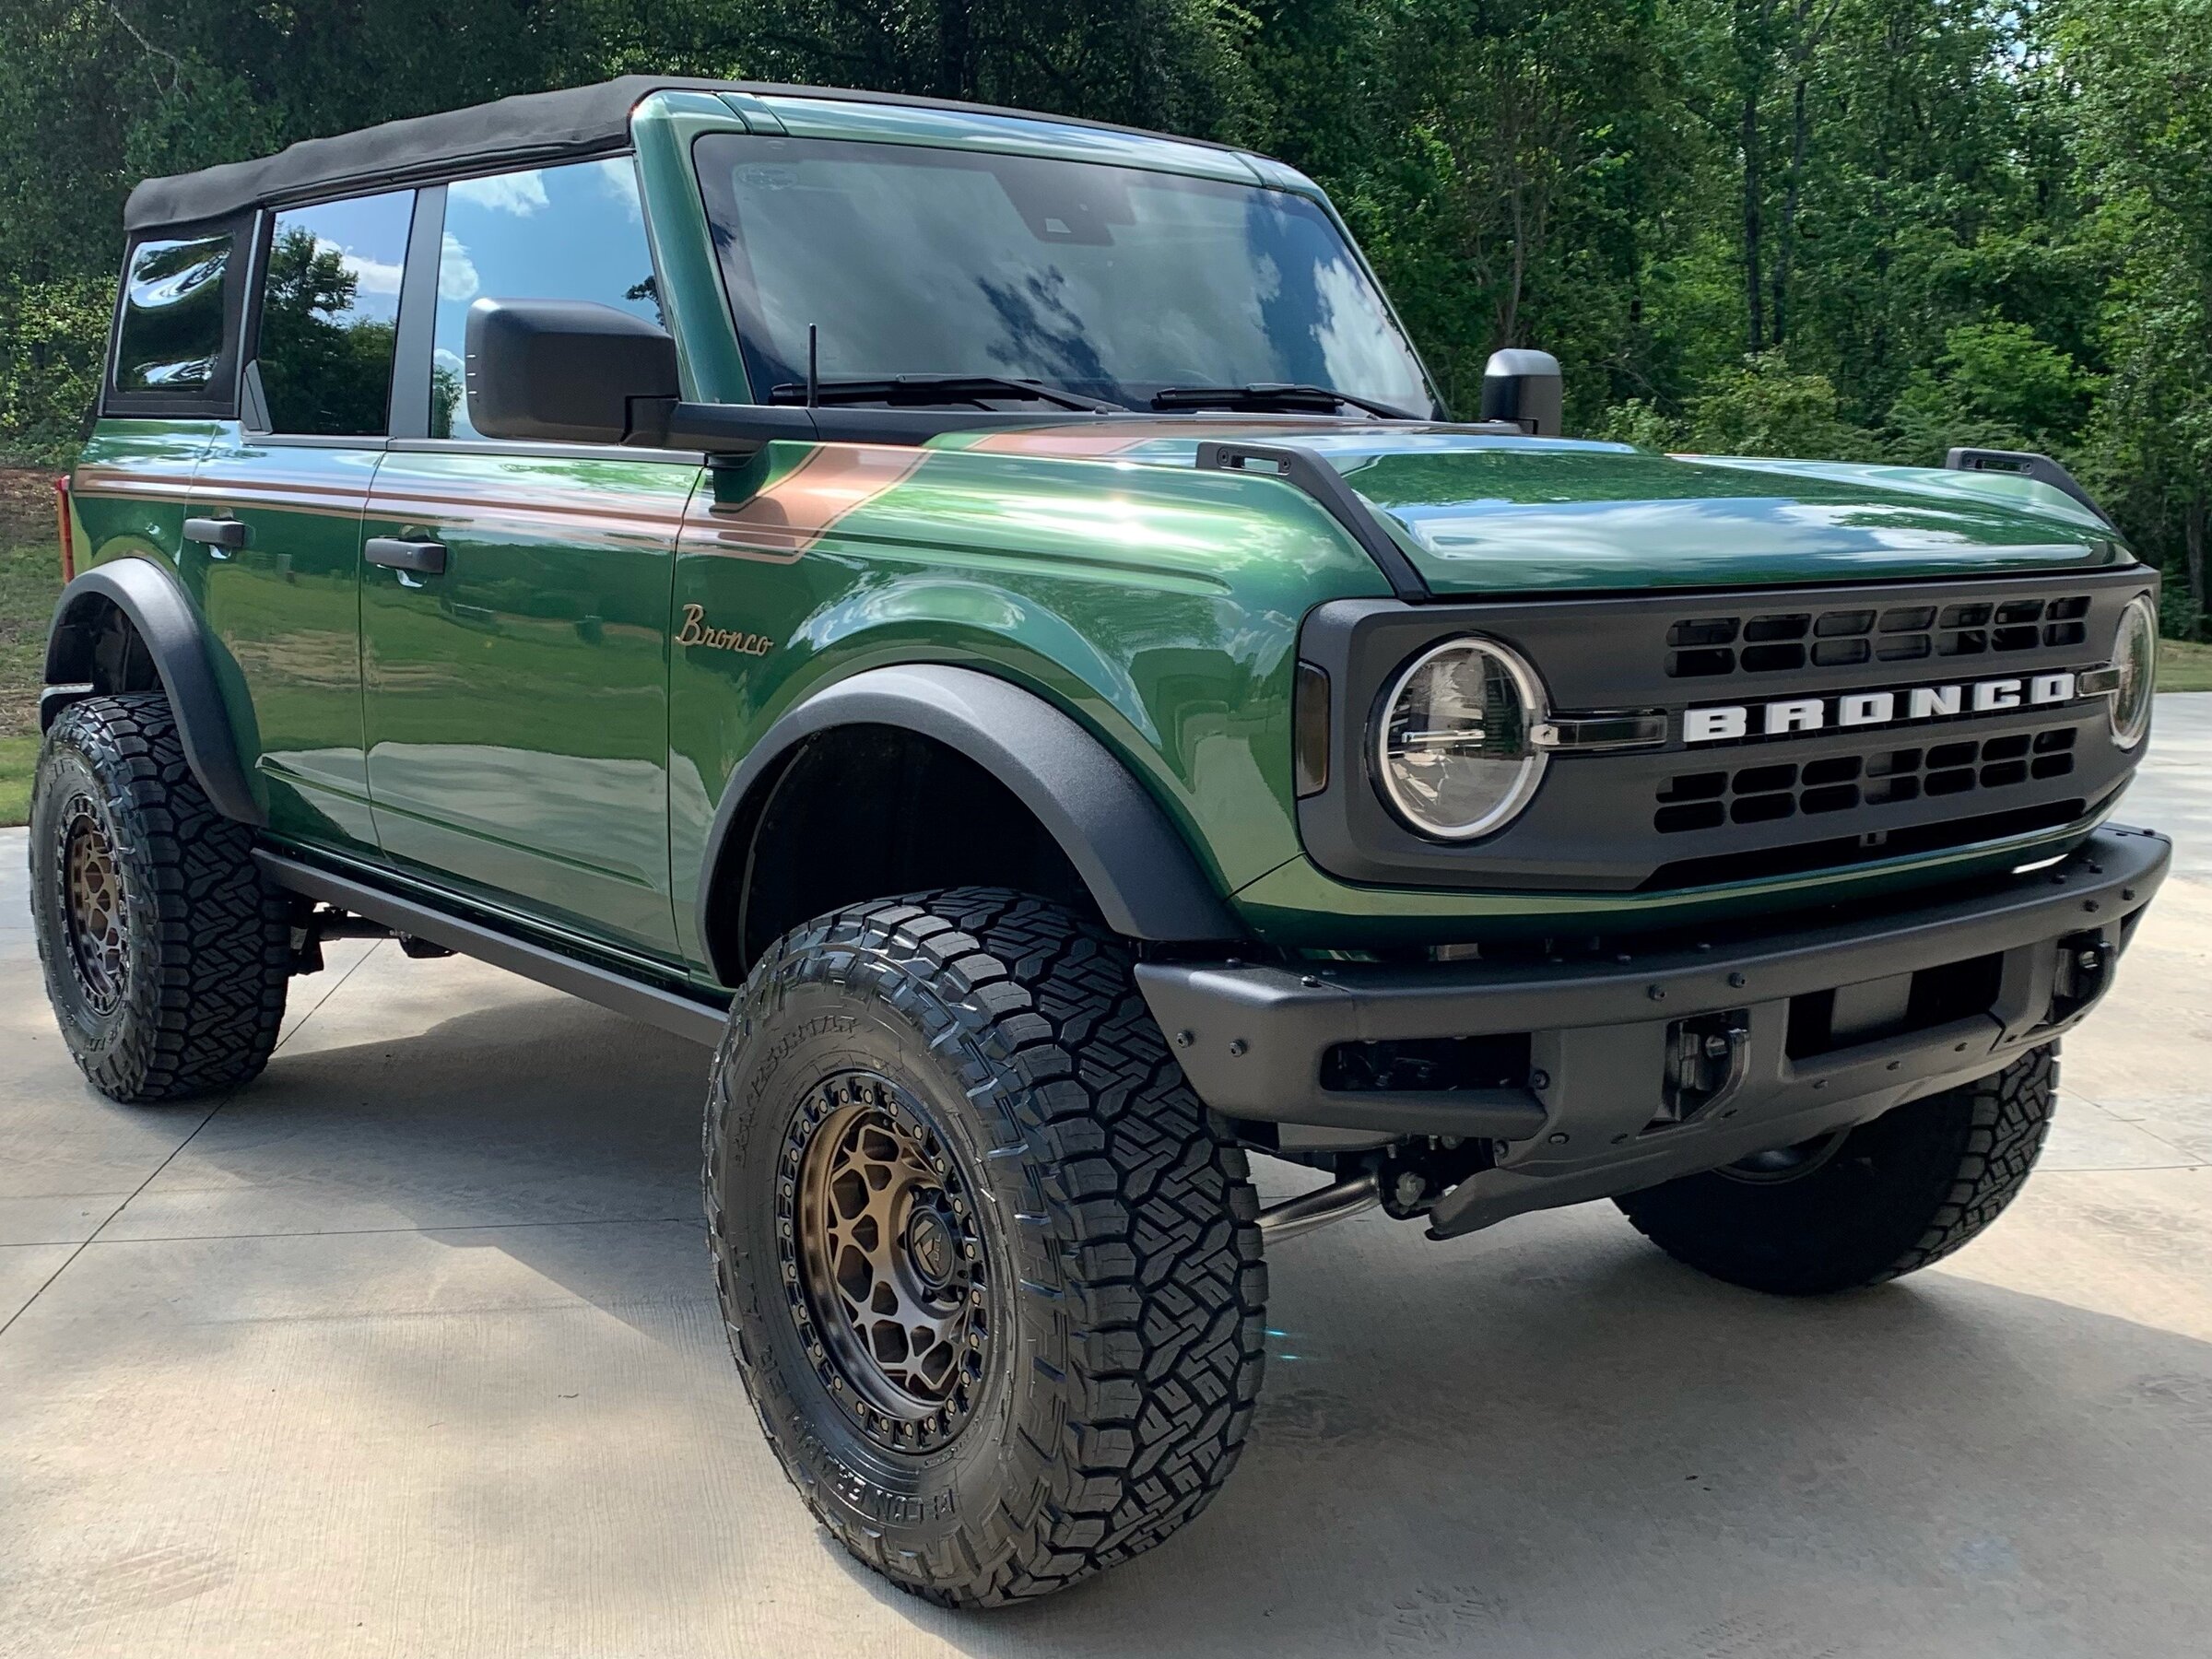 Ford Bronco Anyone Apply Retro Stripes on Eruption Green? Eruption Green with Bronze